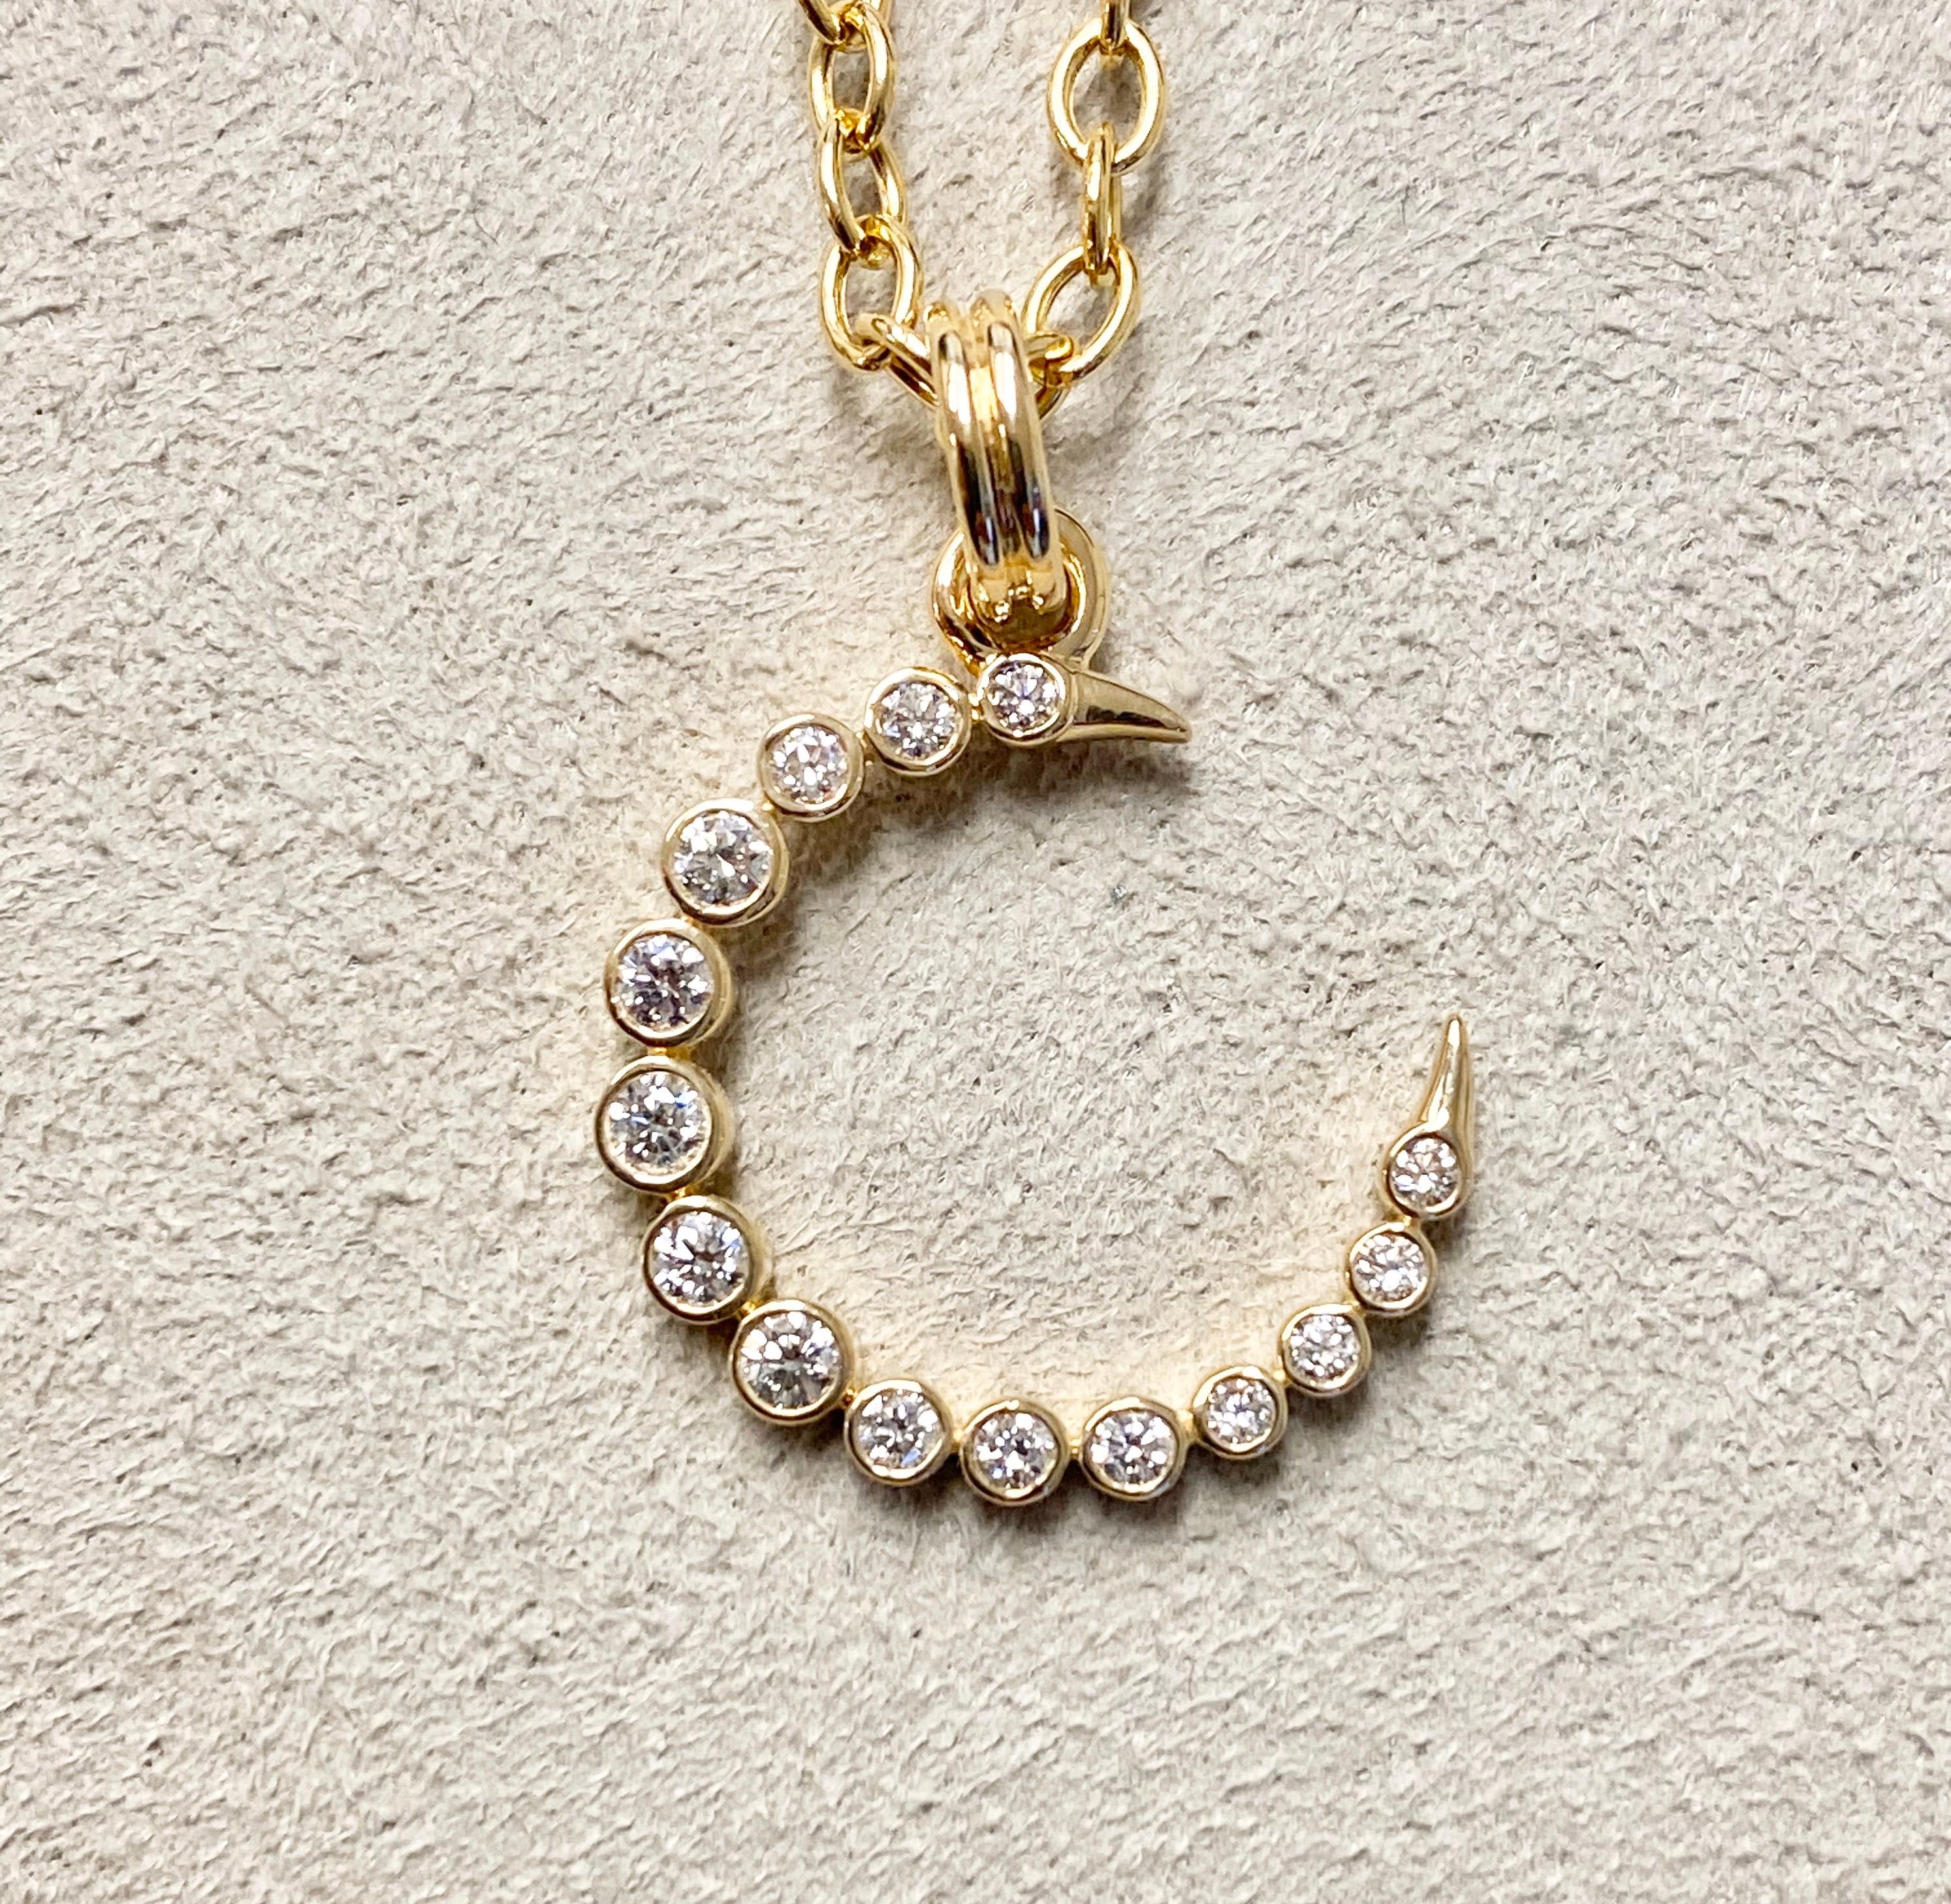 Created in 18 karat yellow gold 
Diamonds 0.30 ct approx
Chain sold separately 

Crafted with 18 karat yellow gold, this pendant features an estimated 0.30 carats of diamonds. The chain is sold separately.

About the Designers ~ Dharmesh &